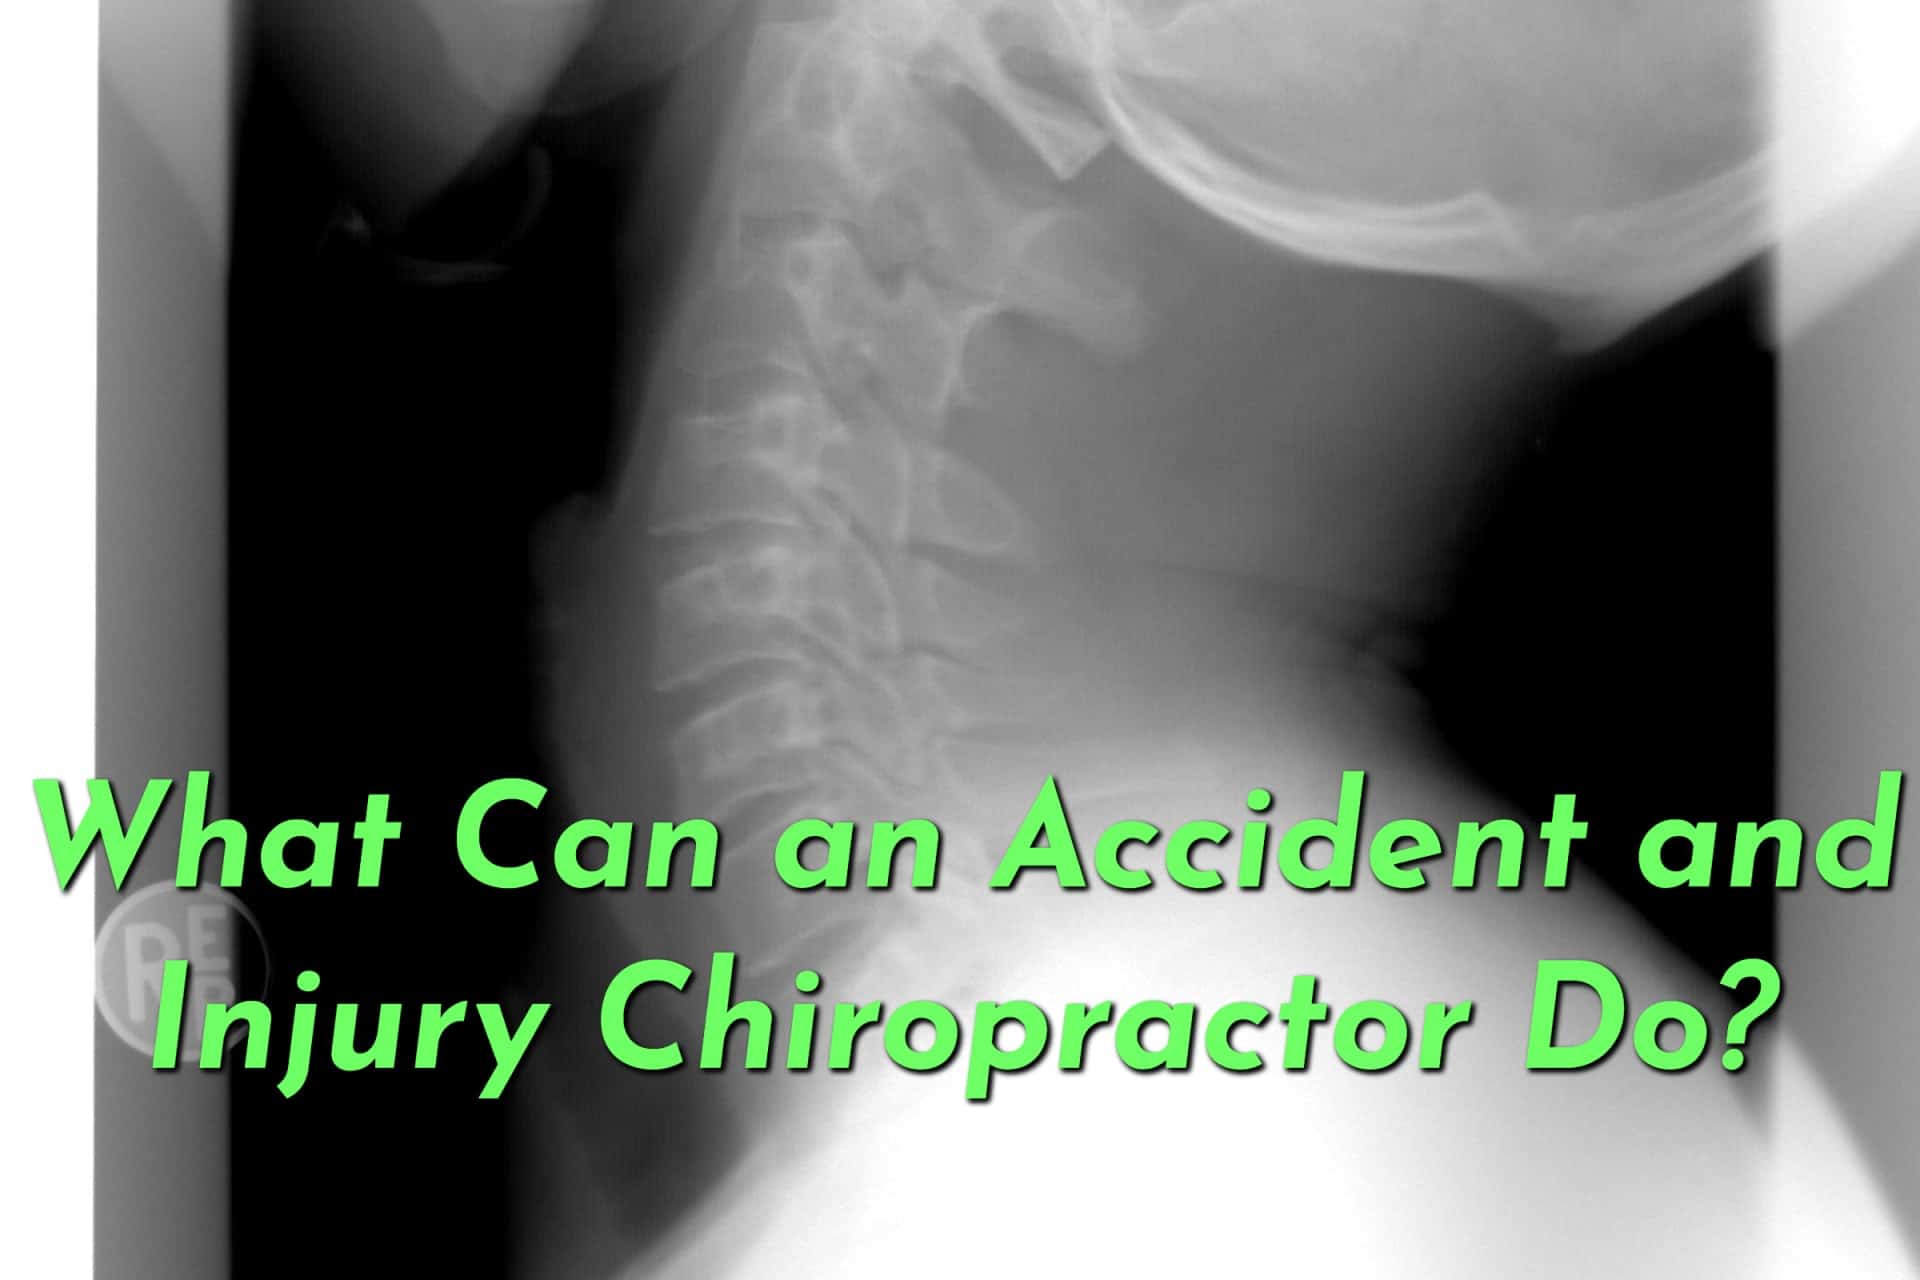 What Does an Accident and Injury Chiropractor Do?